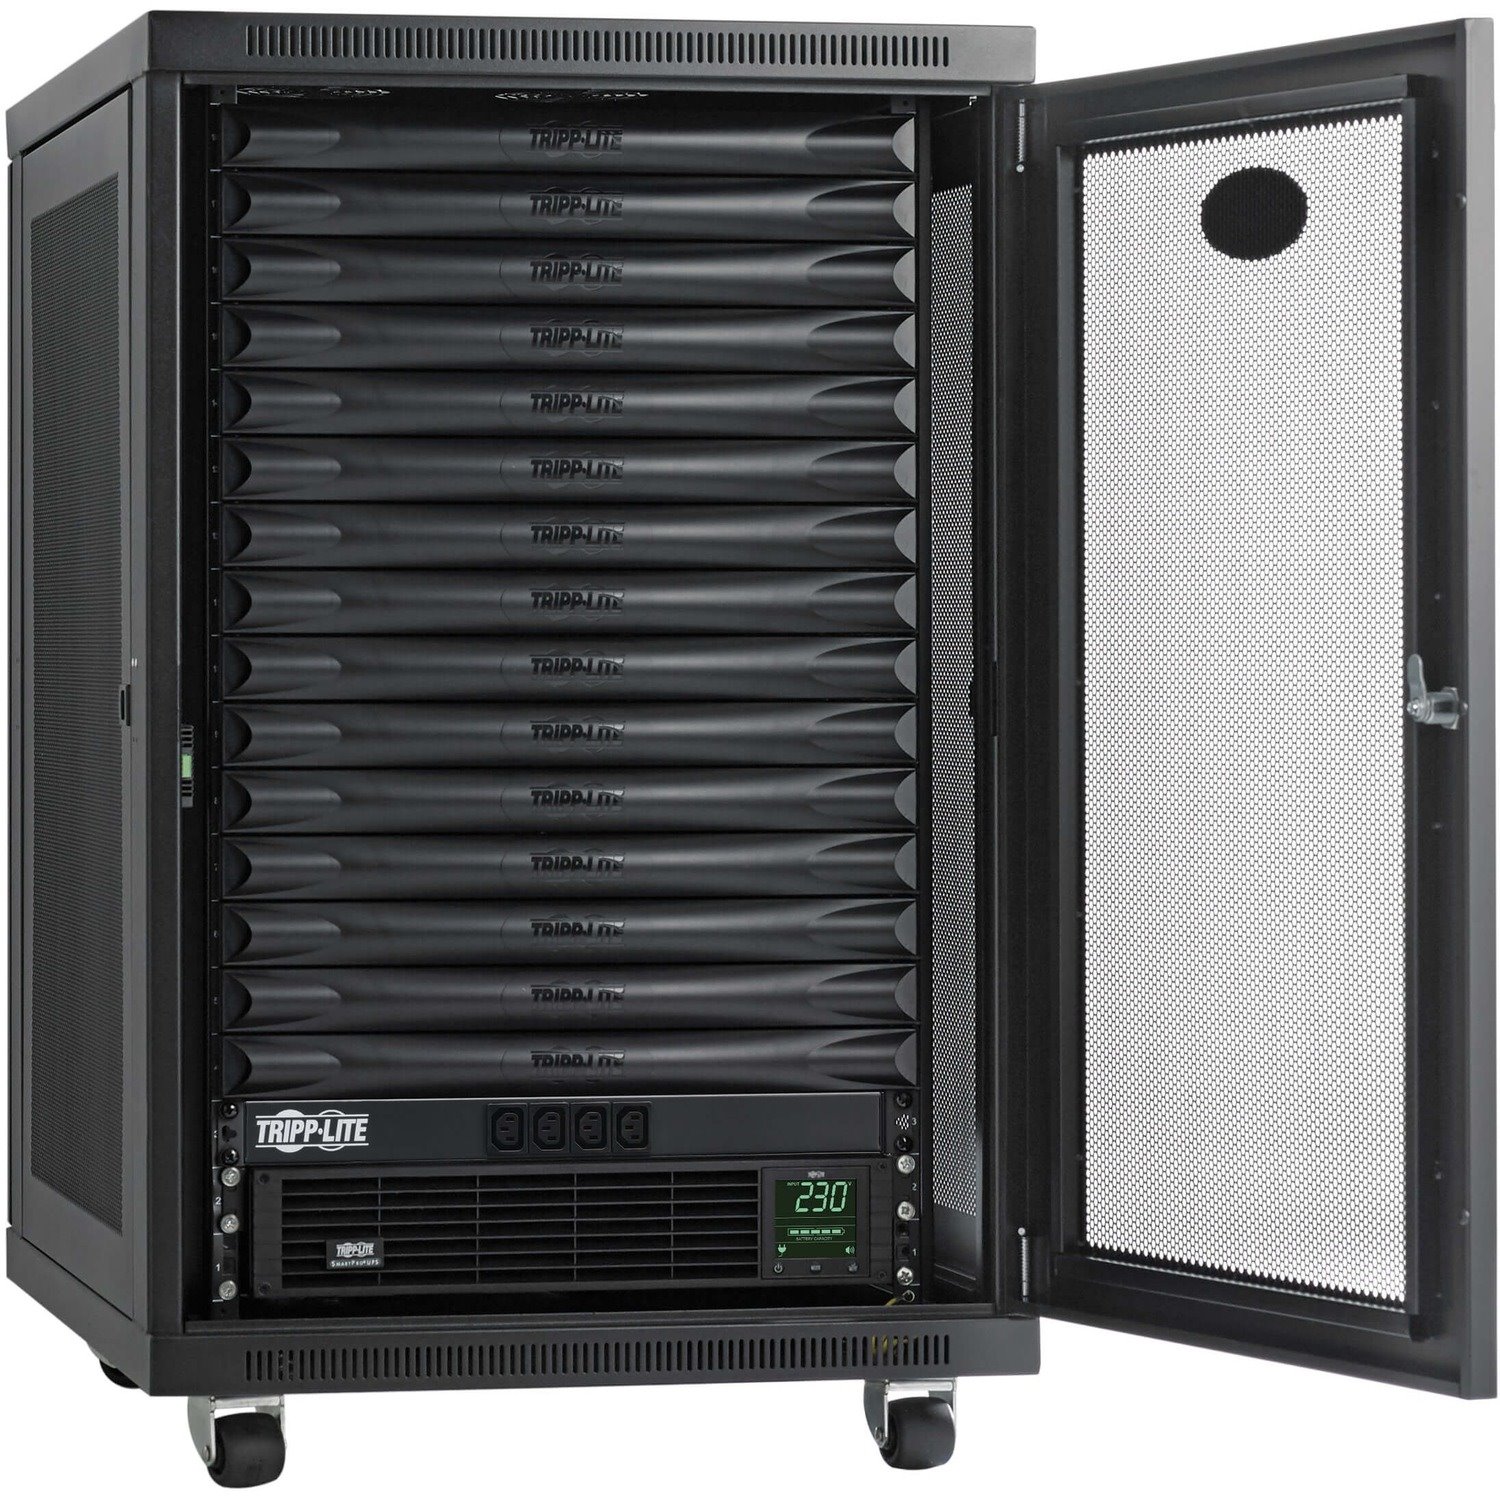 Tripp Lite by Eaton EdgeReady&trade; Micro Data Center - 15U, 1.5 kVA UPS, Network Management and PDU, 230V Assembled/Tested Unit